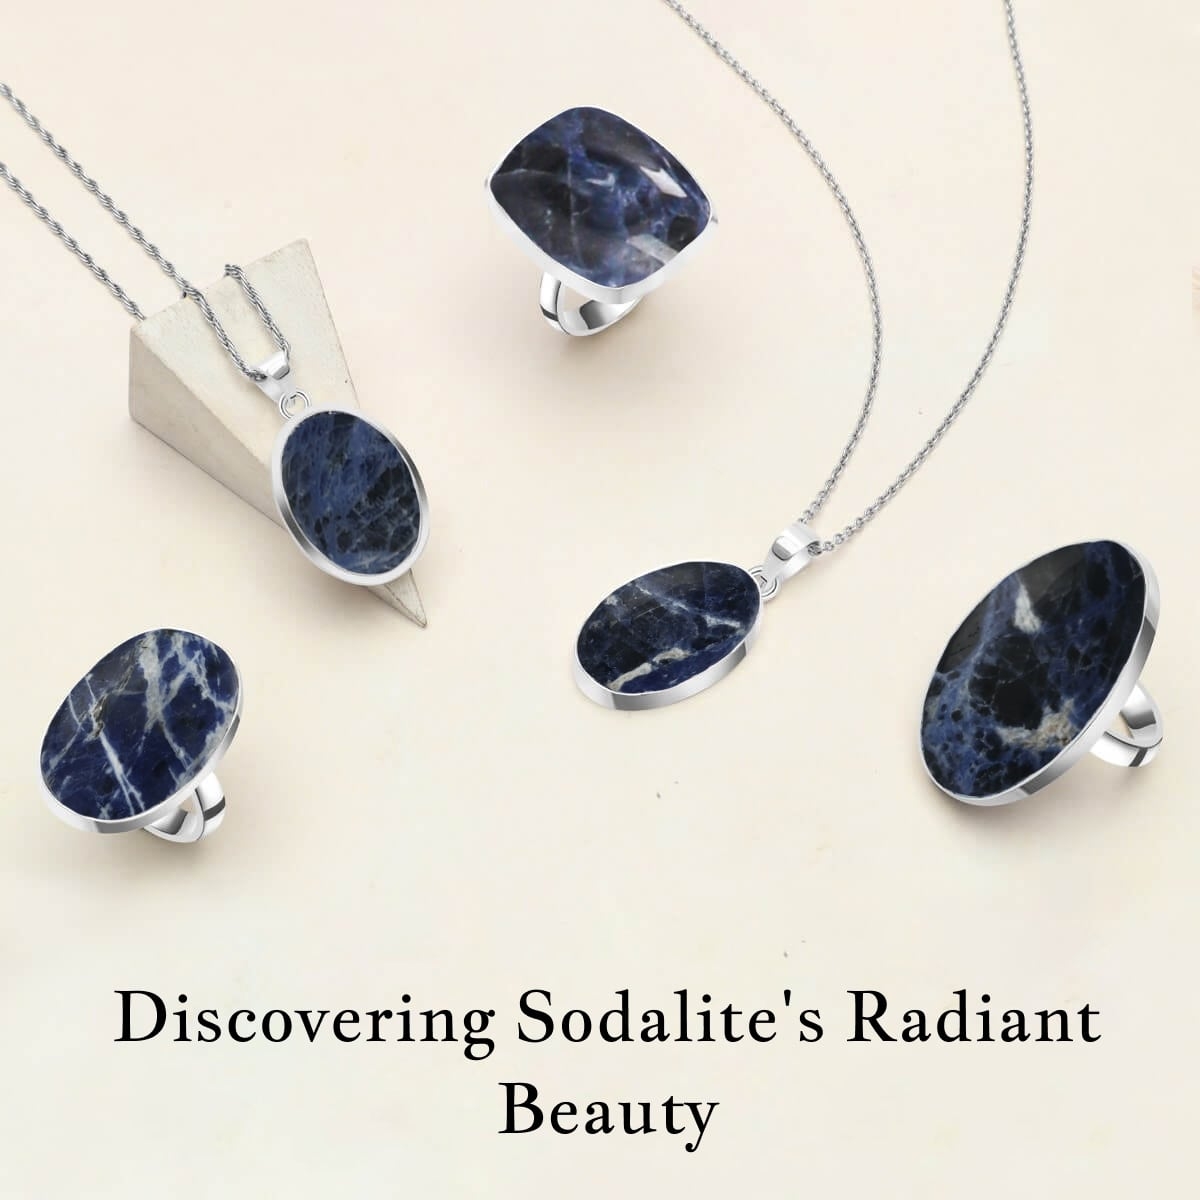 The Beauty of Sodalite